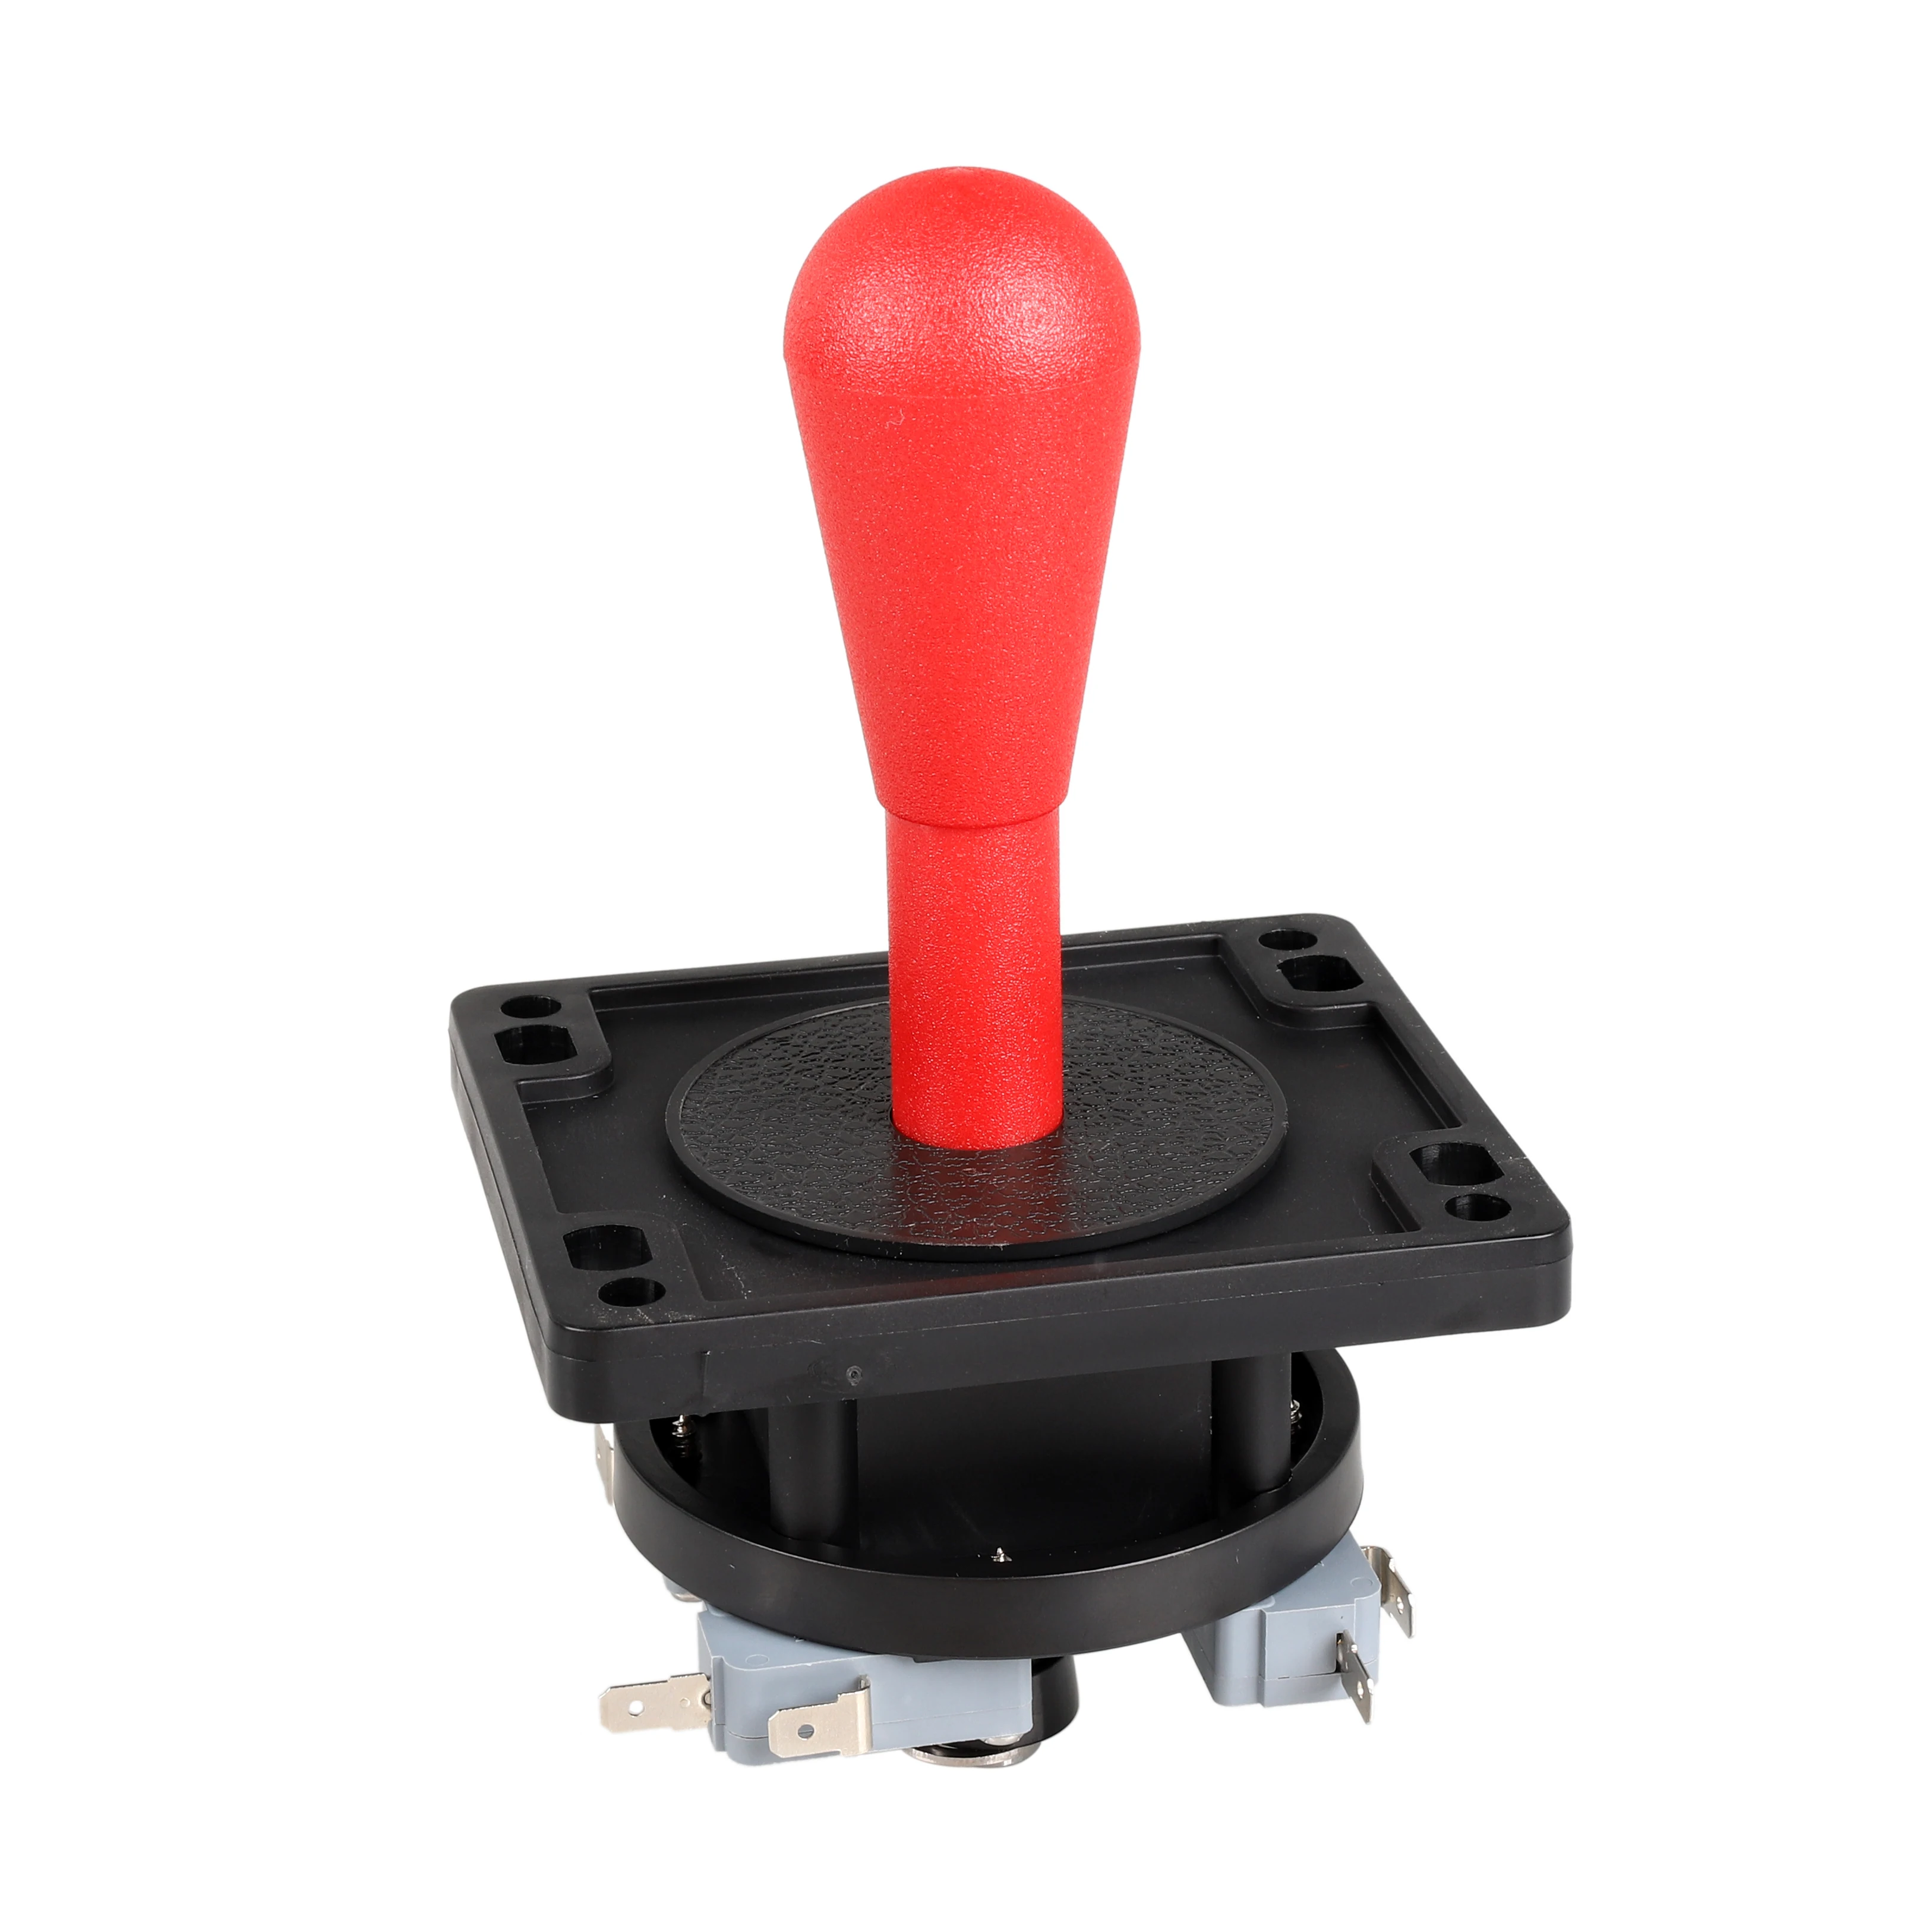 

1x American Style Arcade 2Pin Bat Joystick Switchable from 8 Ways Operation Elliptical Handle 0.187" (4.8mm) Terminal